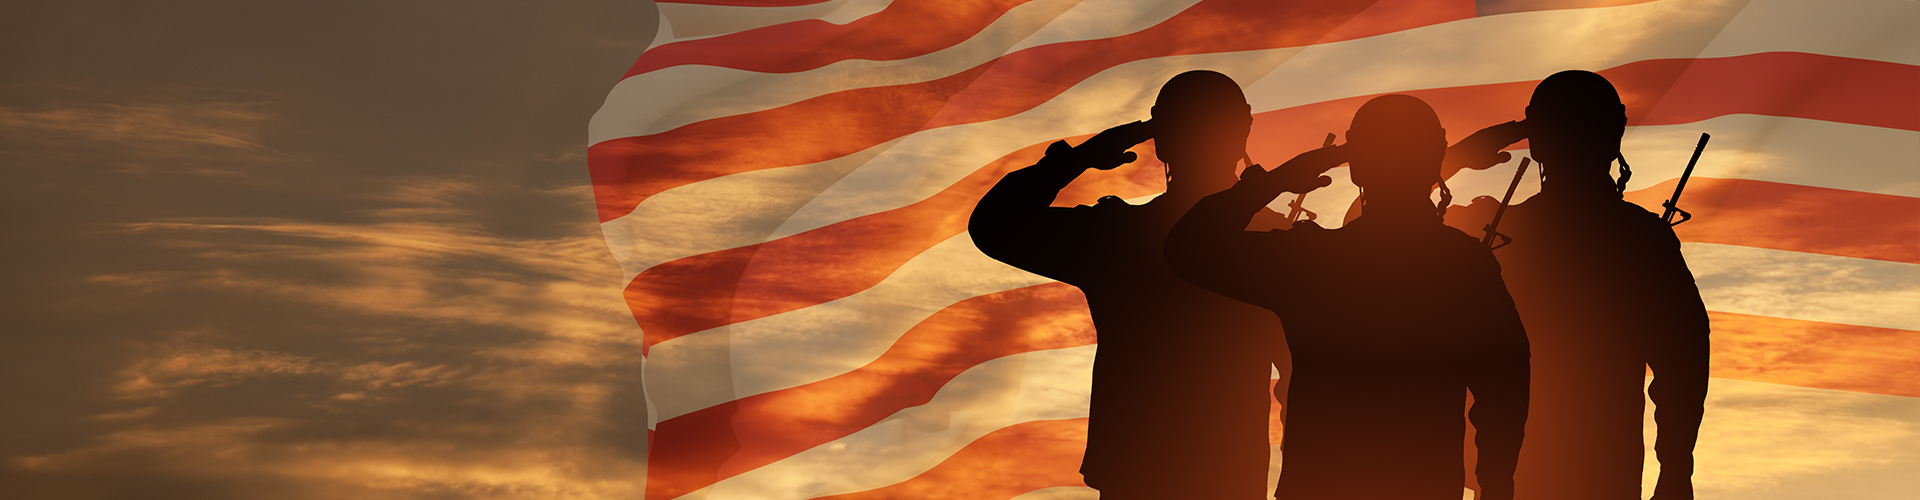 Silhouettes of soldiers in front of an American flag